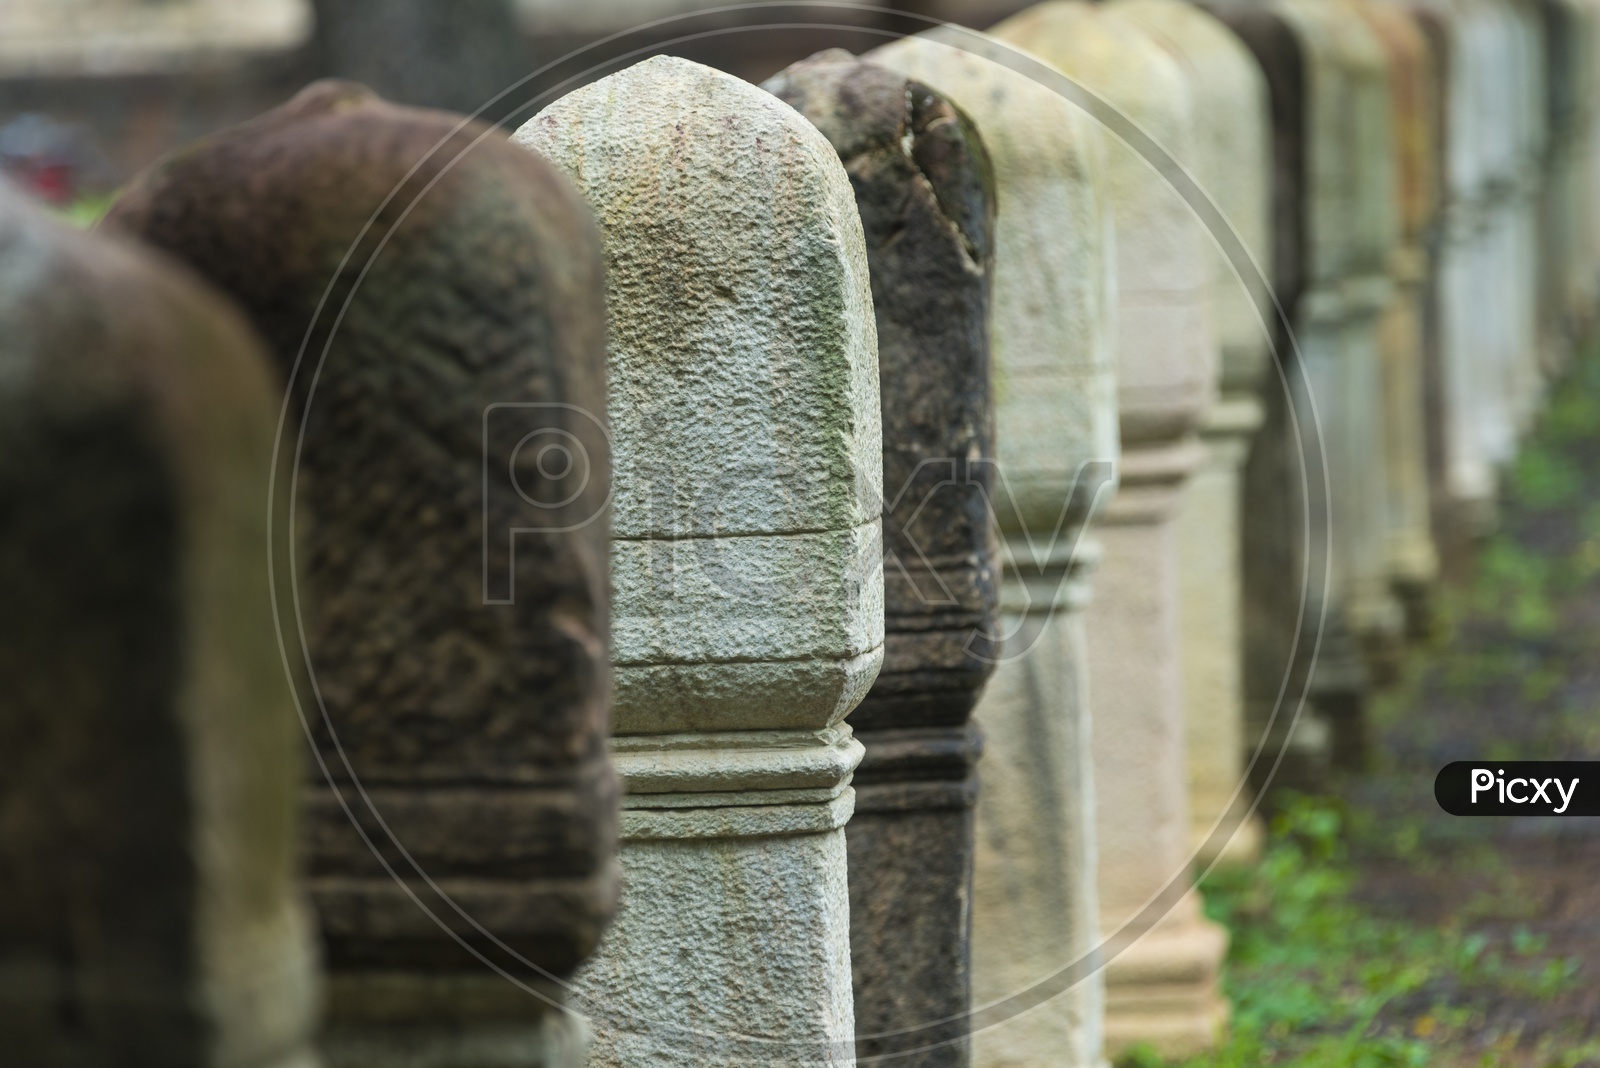 Railing Pillars Carved With Stones At Ancient Buddha temple in Thailand